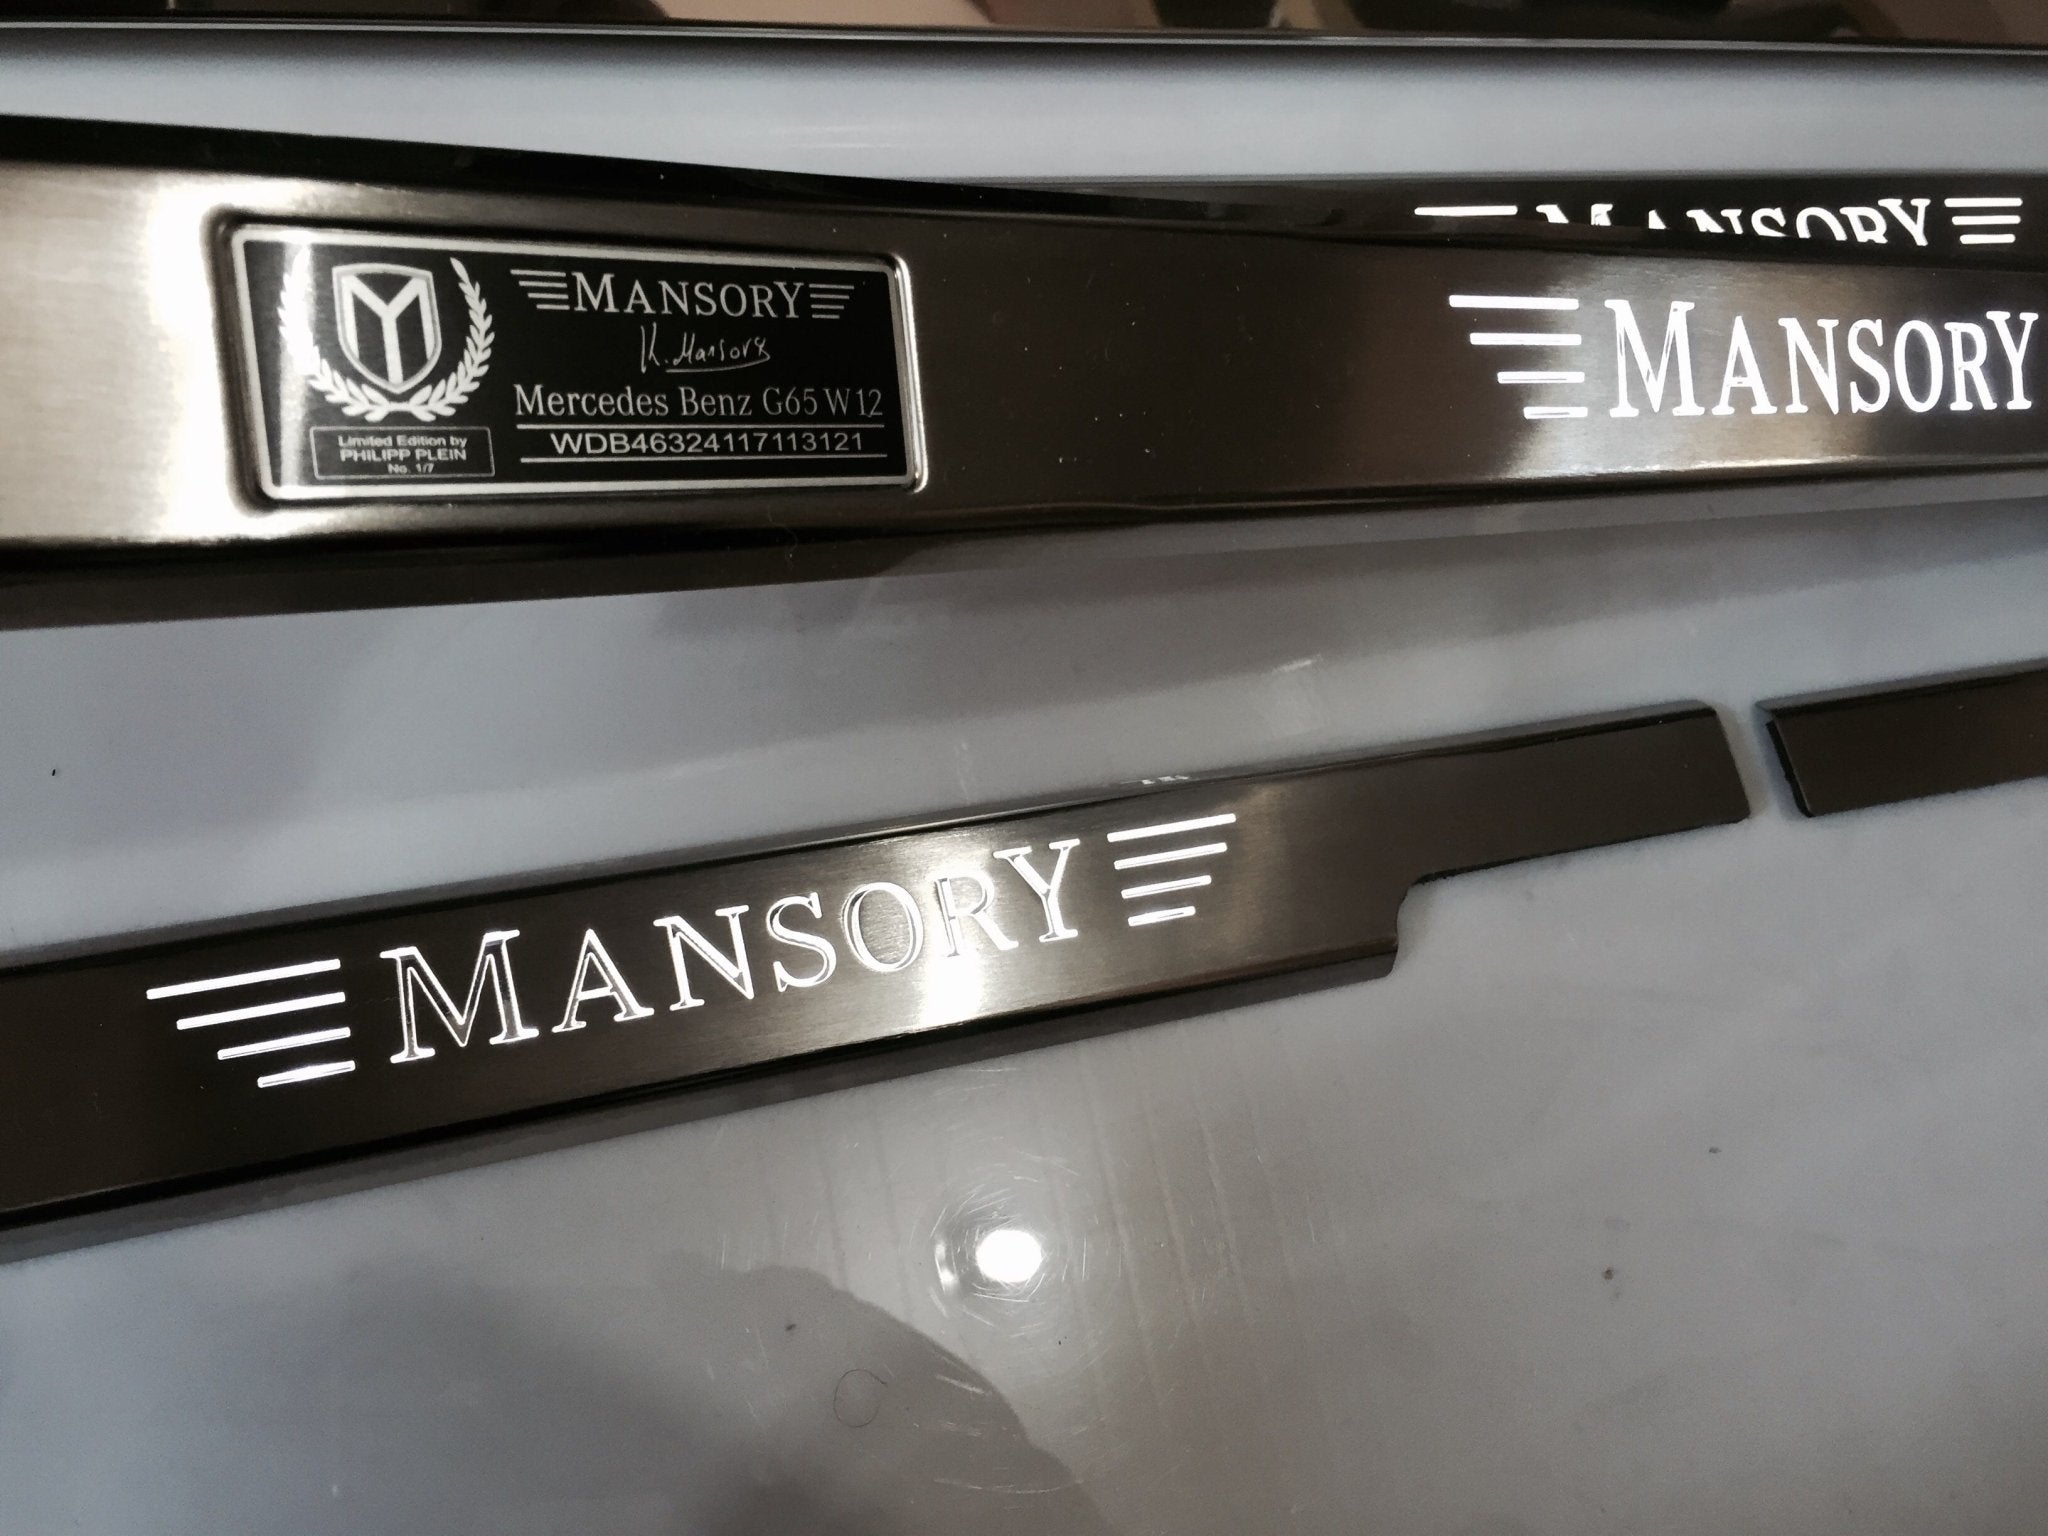 Mansory LED Illuminated Door Sills 4 or 5 pcs for Mercedes-Benz G-Class W463